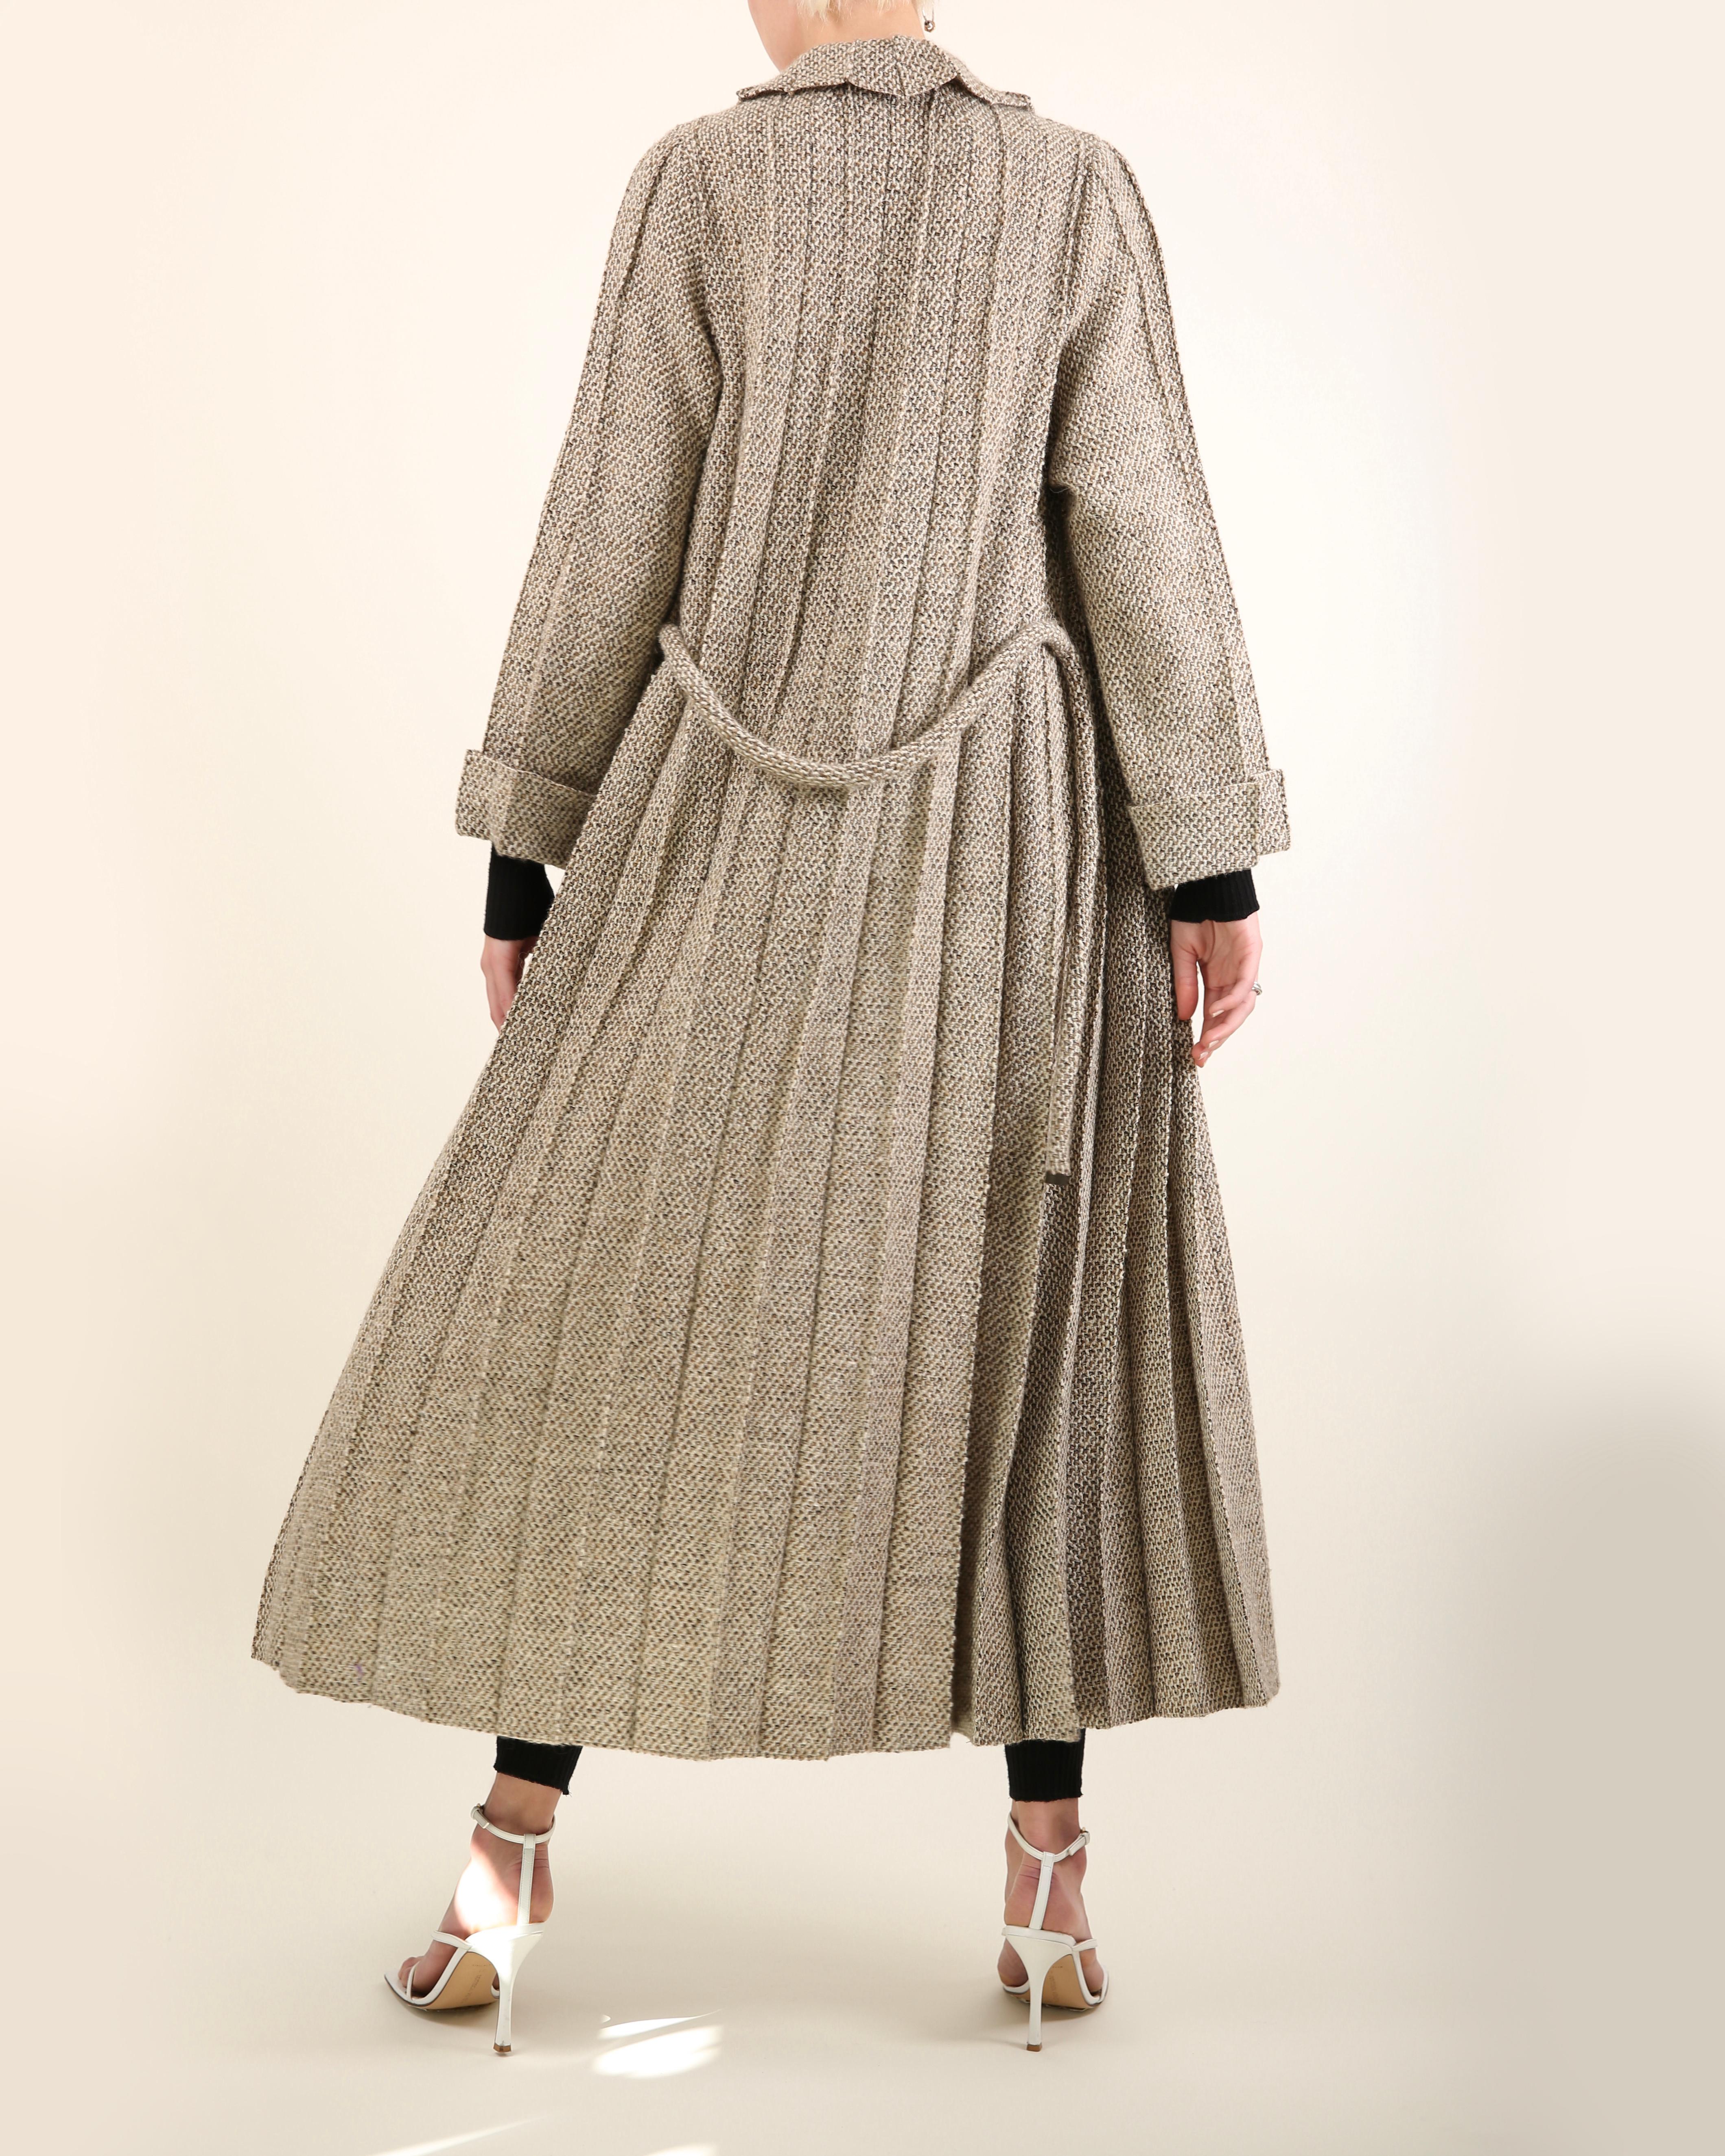 Chanel Fall 1998 brown & white tweed wool long pleated maxi jacket dress coat   For Sale 10